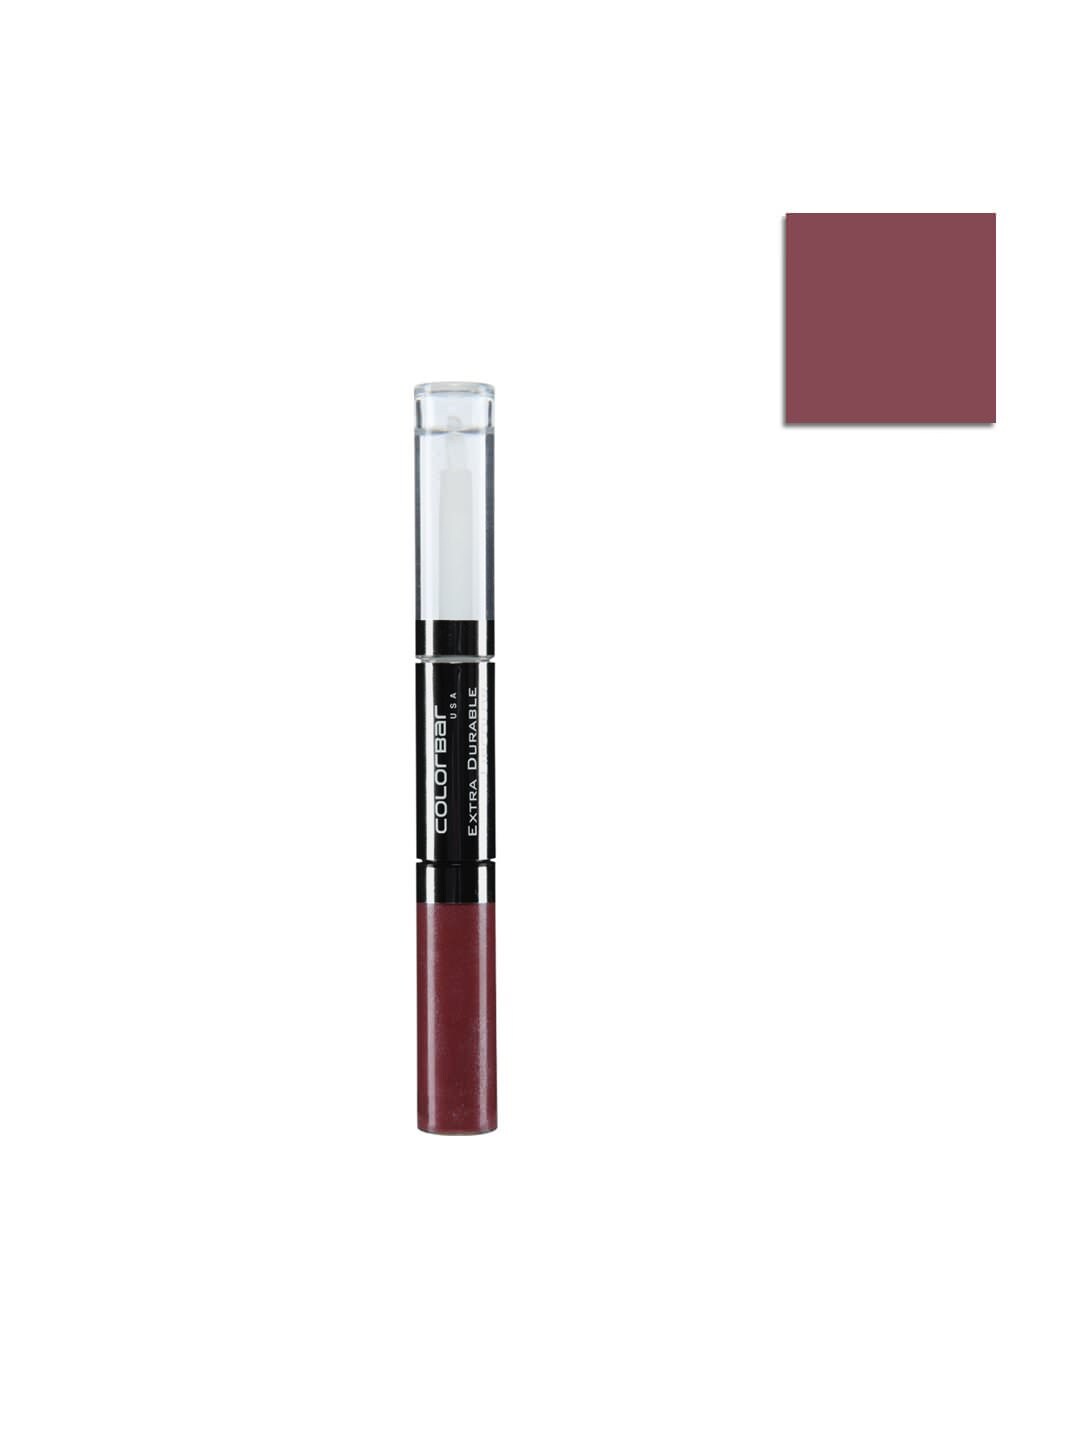 Colorbar Extra Durable Frenzy Lip Color 011